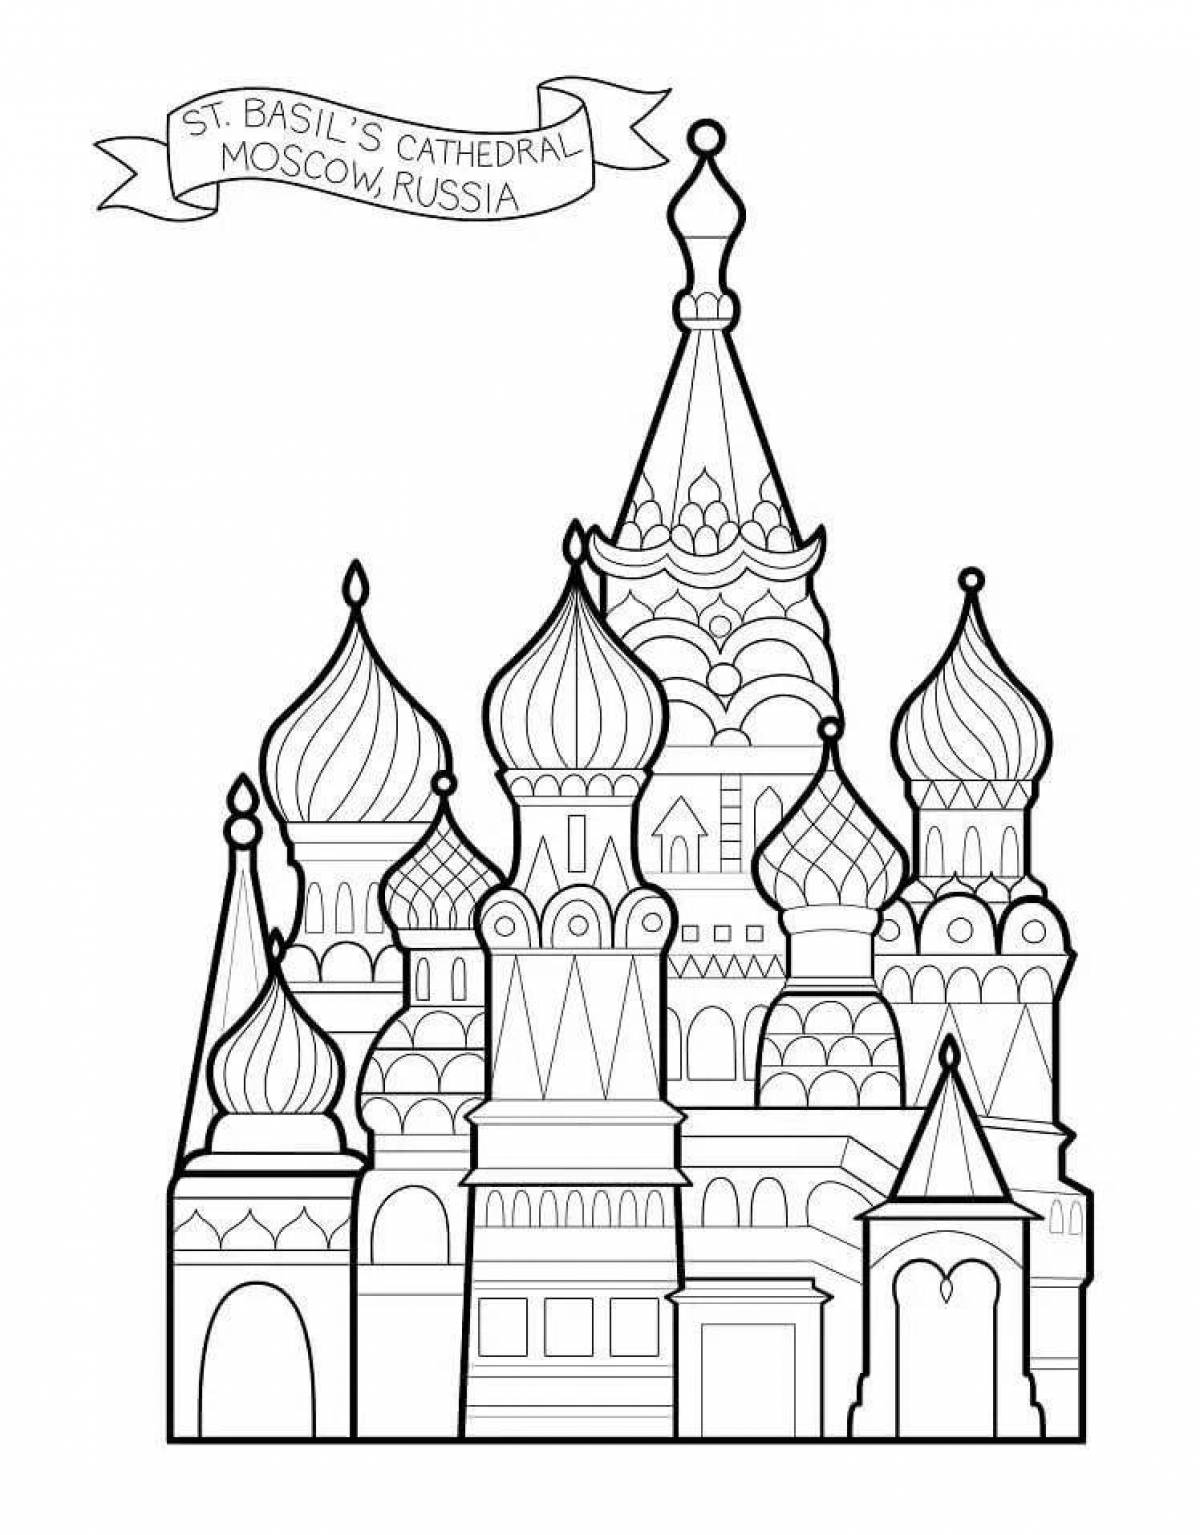 Exquisite cathedral coloring page